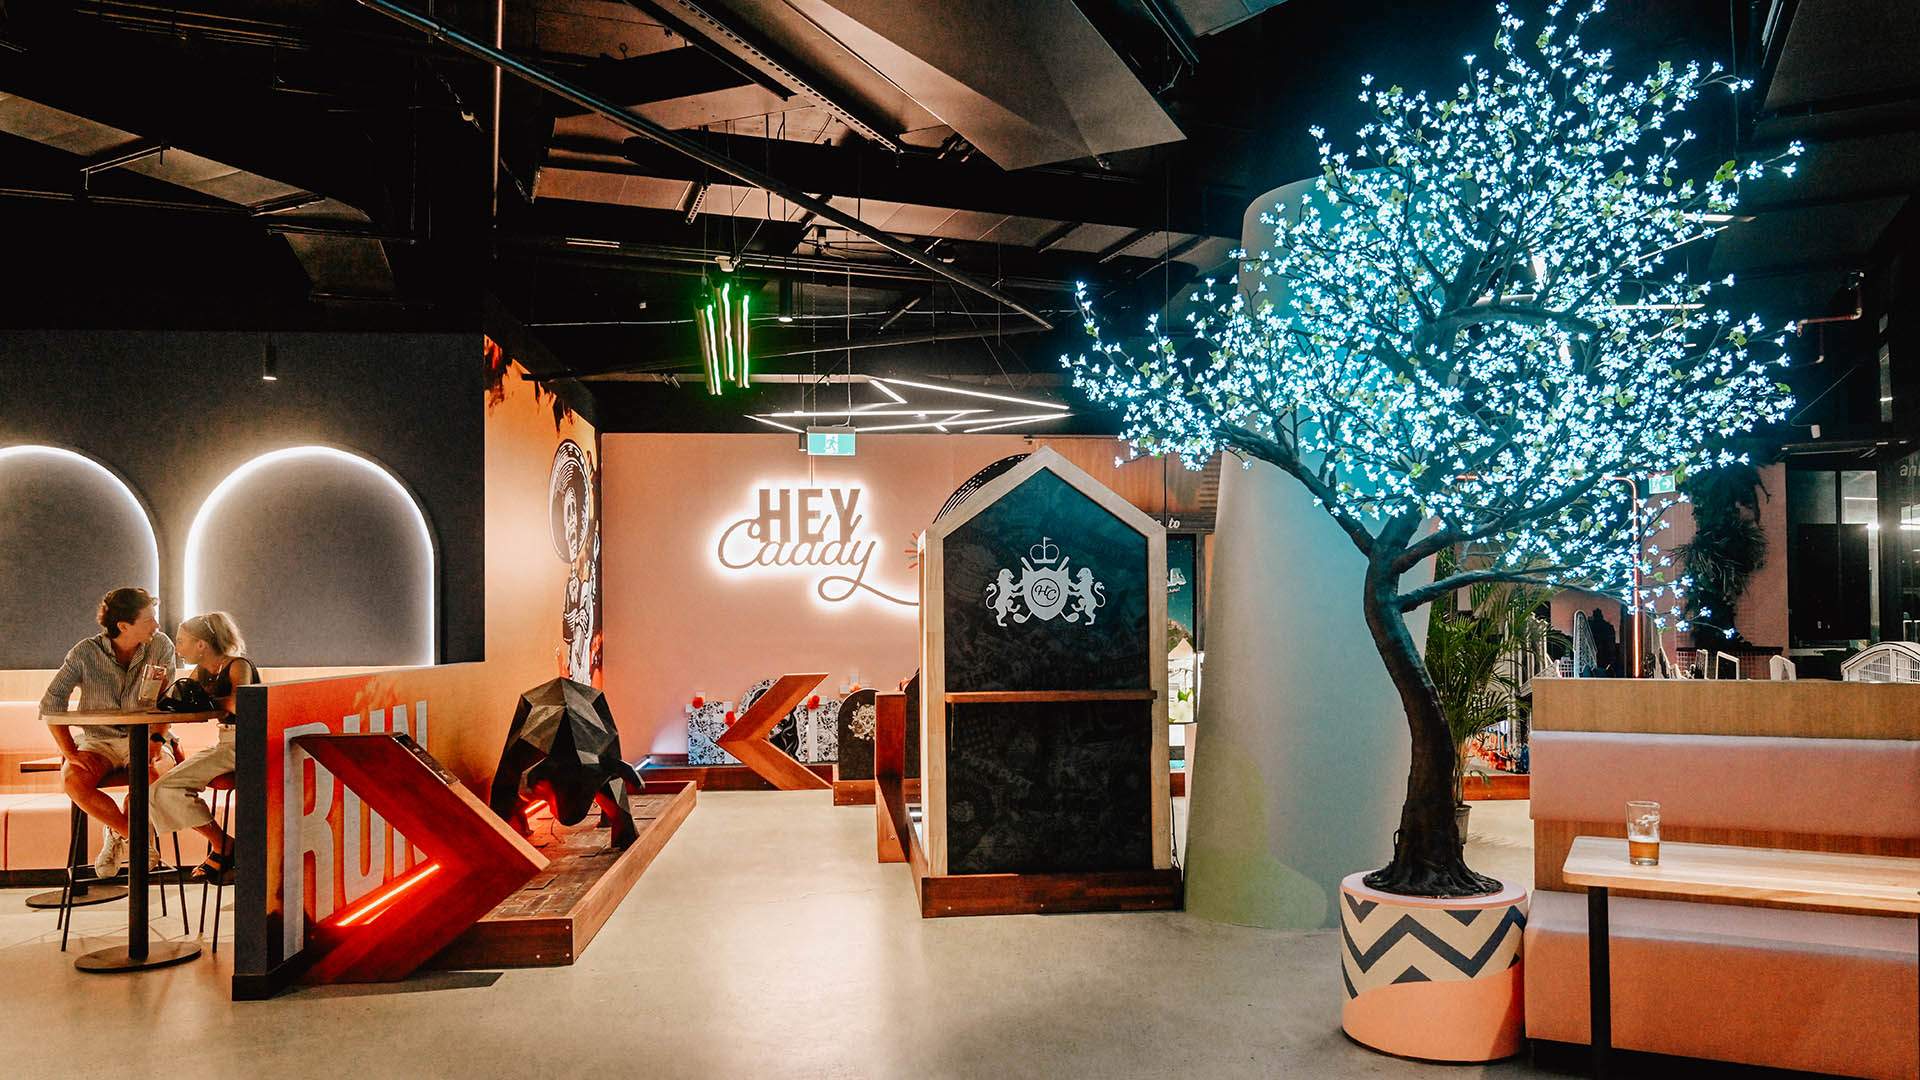 Now Open: Hey Caddy and X-Golf's South Bank Venue Boasts a 12-Hole Indoor Mini-Golf Course, Golf Simulator and Bar